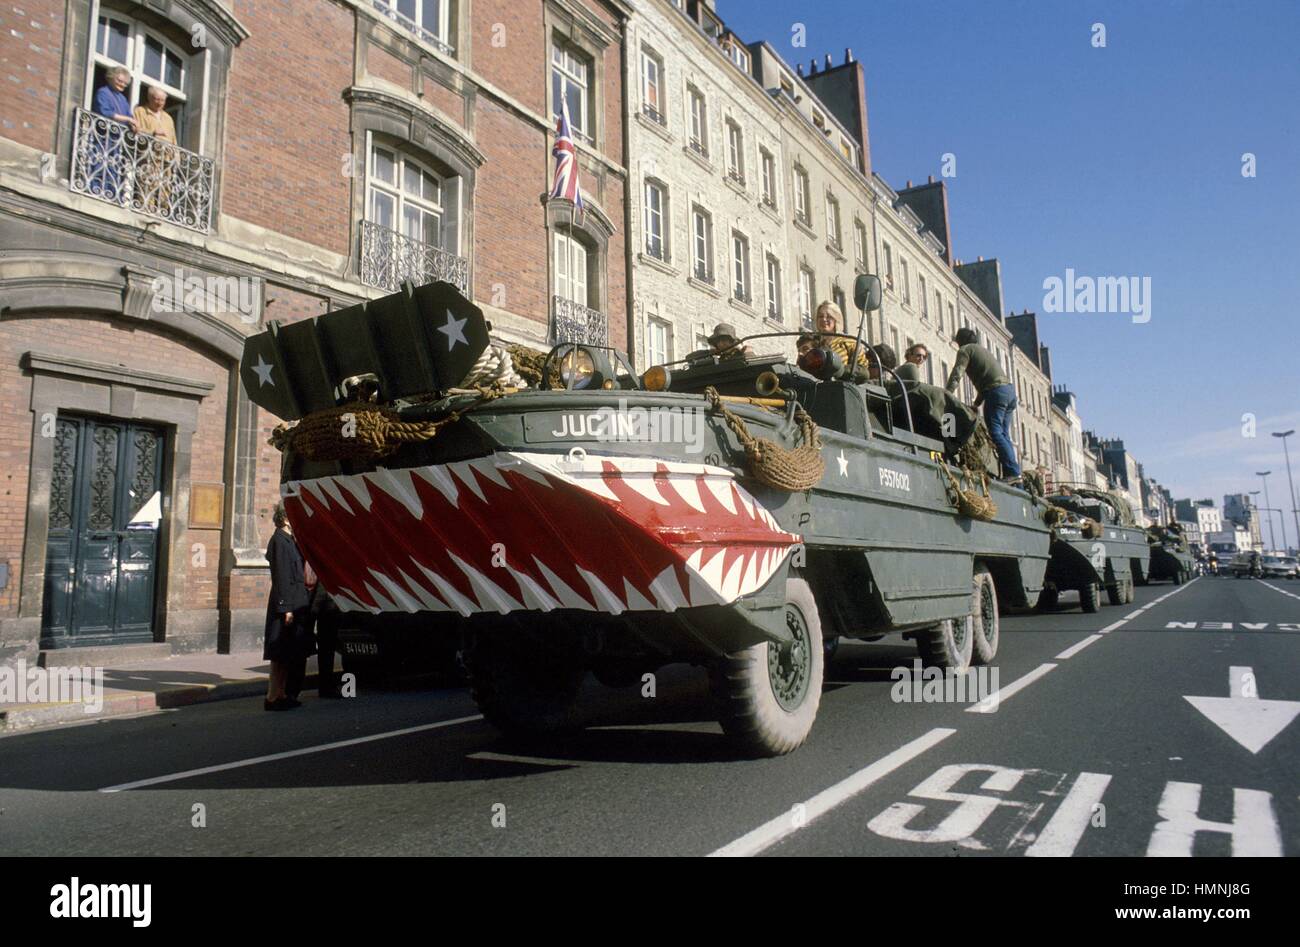 Normandy, war veterans and collectors of vintage military vehicles participate the yearly ceremonies for the commemoration of the allied landing of June 1944, DUKW  amphibious truck Stock Photo